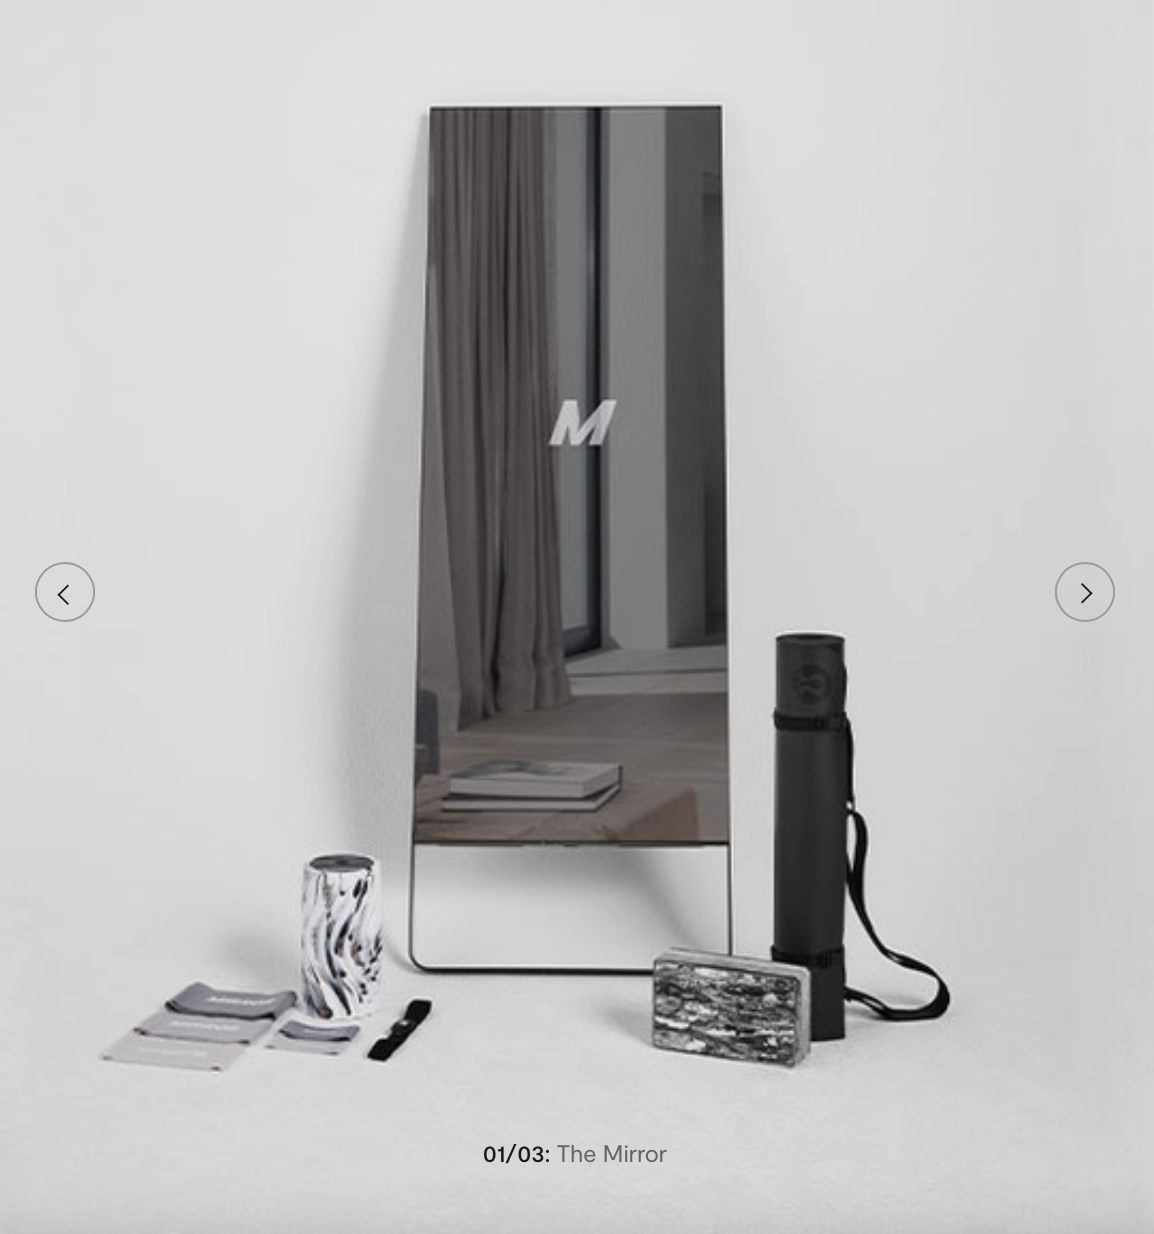 Mirror: Save 0- Limited time offer